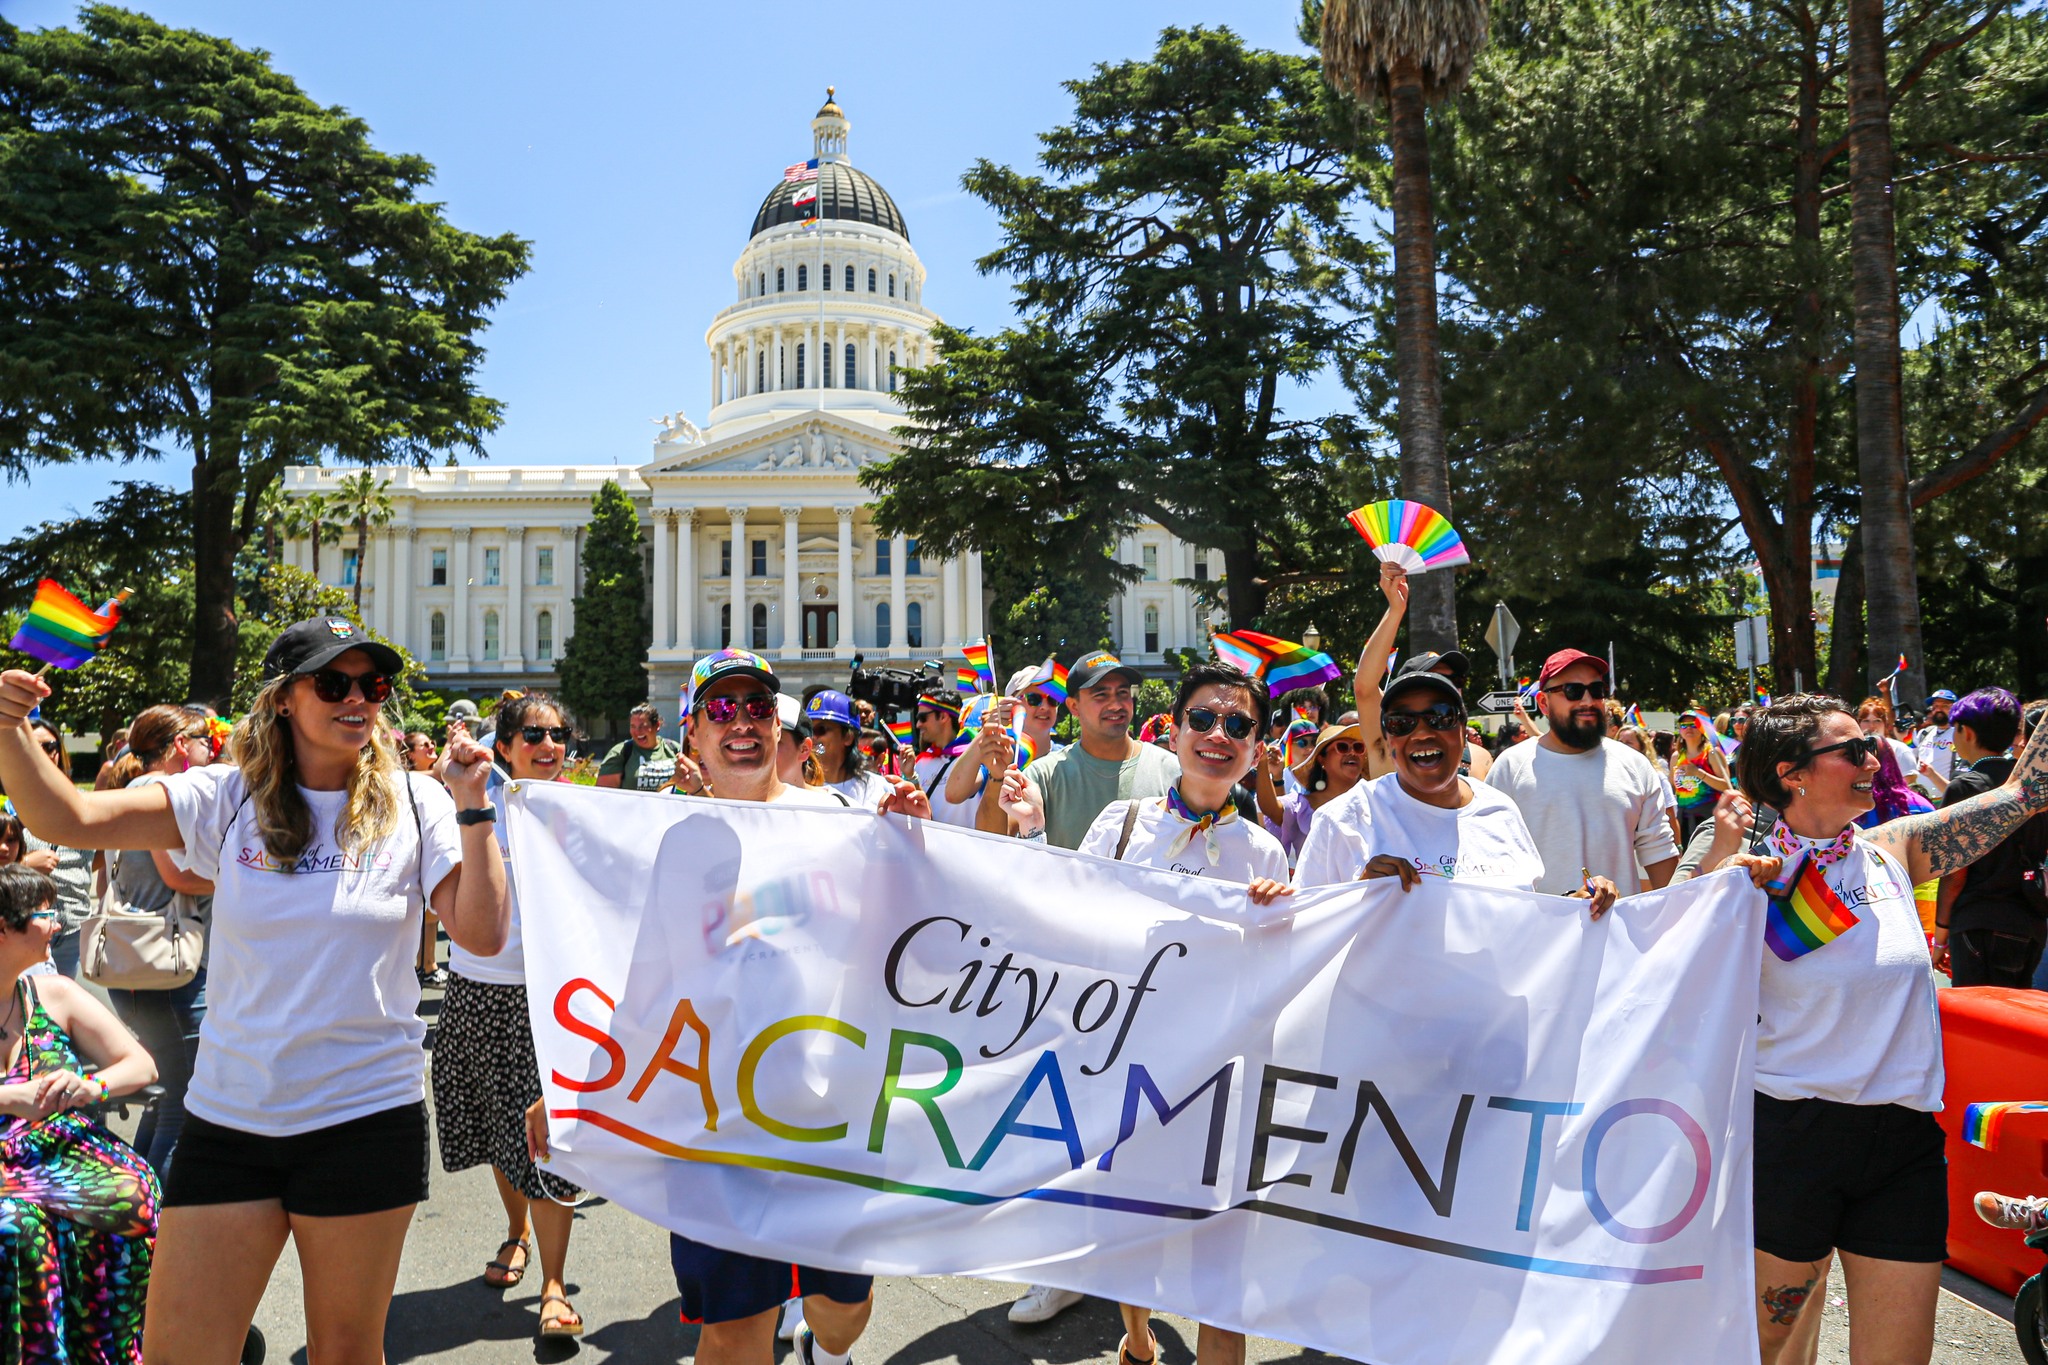 People hold a City of Sacramento banner in front of the California State Capitol Building